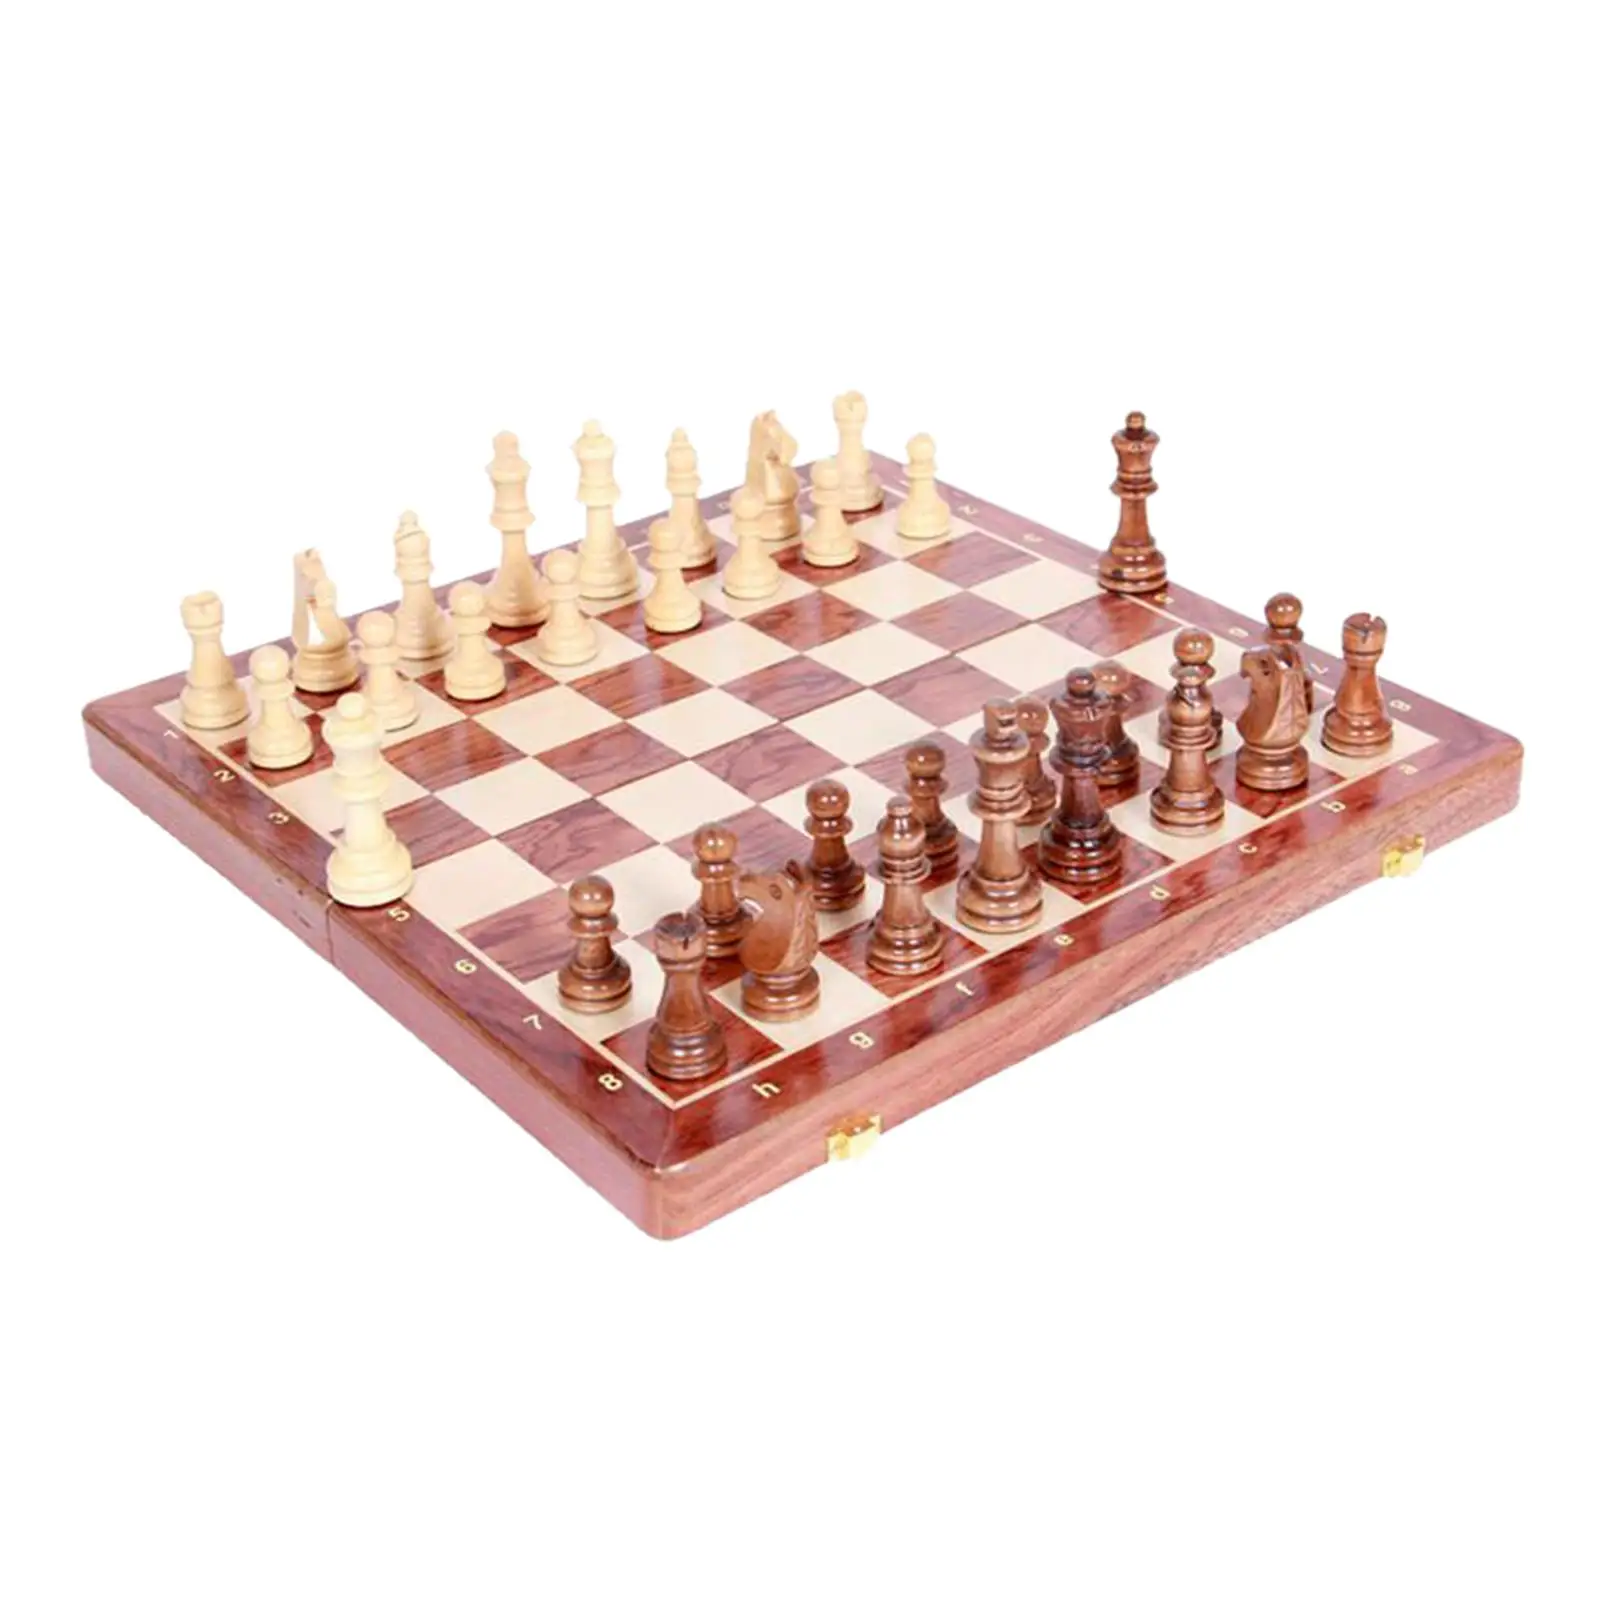  Wooden Chess Set - Handcrafted Chess Pieces - 15 Inch